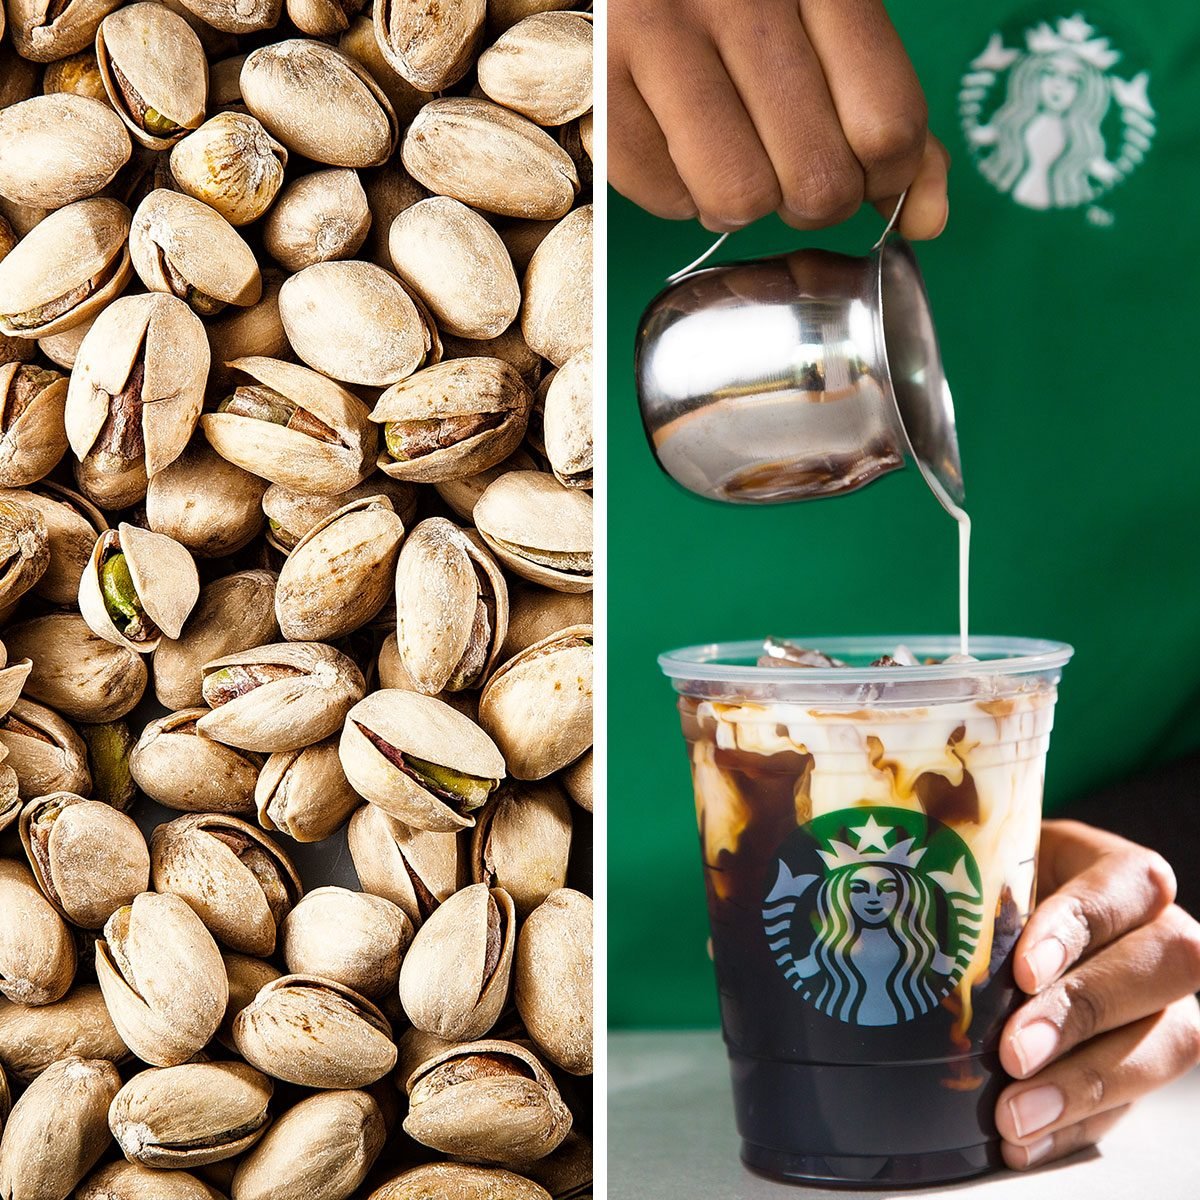 https://www.tasteofhome.com/wp-content/uploads/2023/01/Pistachio-Cream-Cold-Brew-Review-TOH-DH-Getty-974495500-Courtesy-Starbucks.jpg?fit=700%2C1024